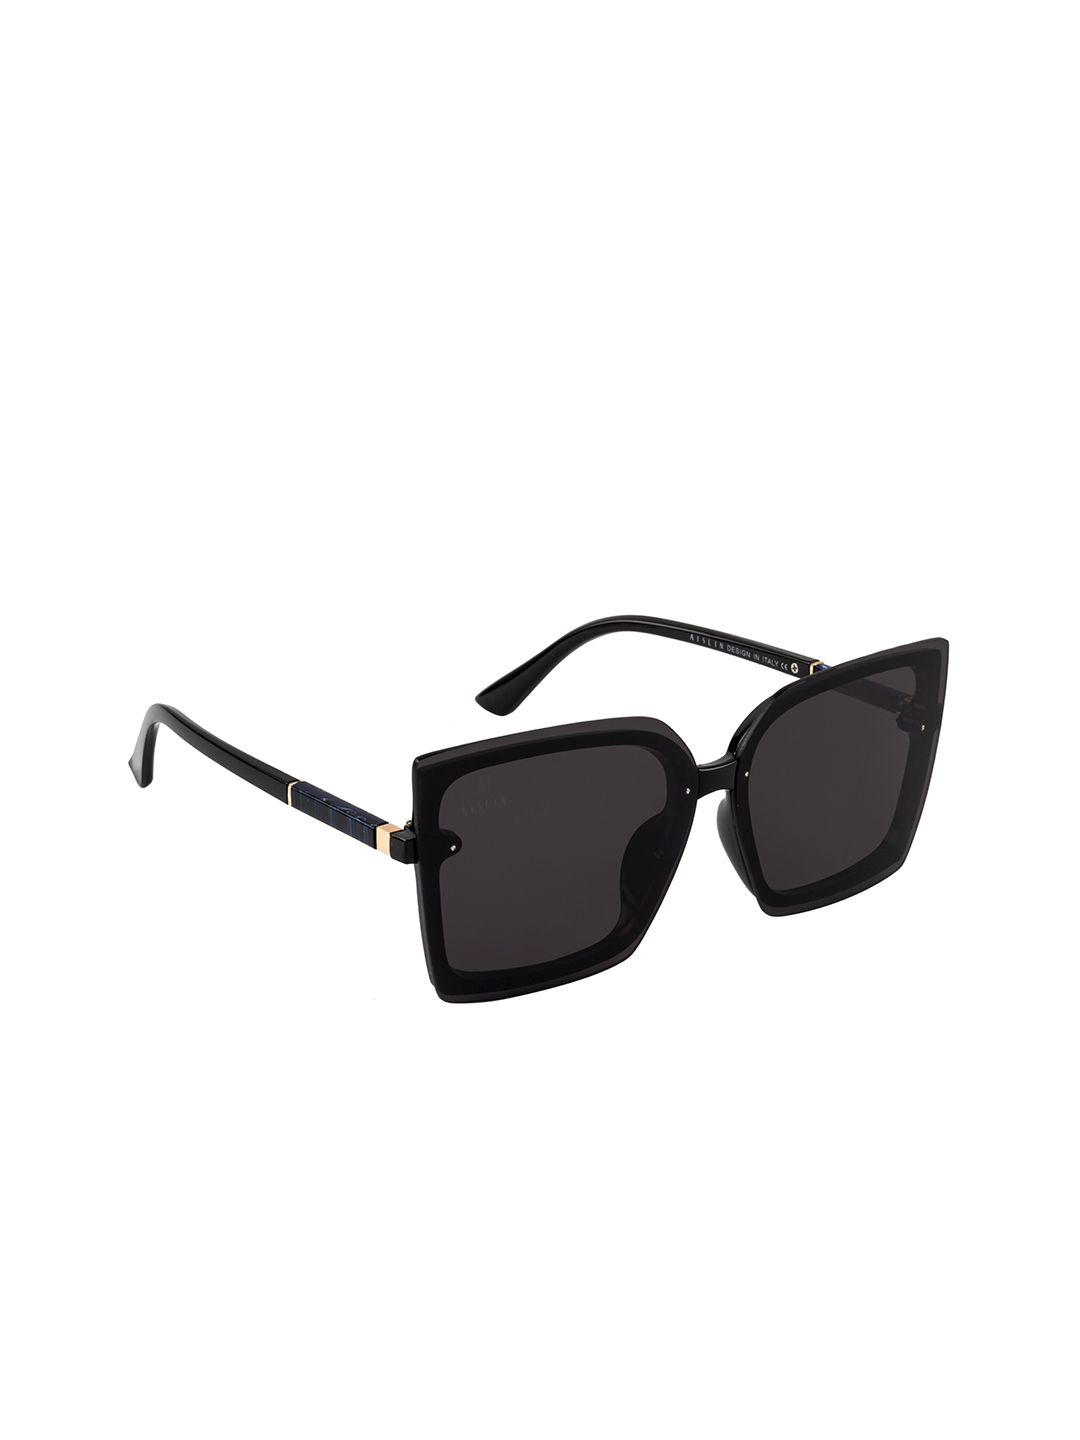 AISLIN Women Black Lens & Black Butterfly Sunglasses with UV Protected Lens Price in India